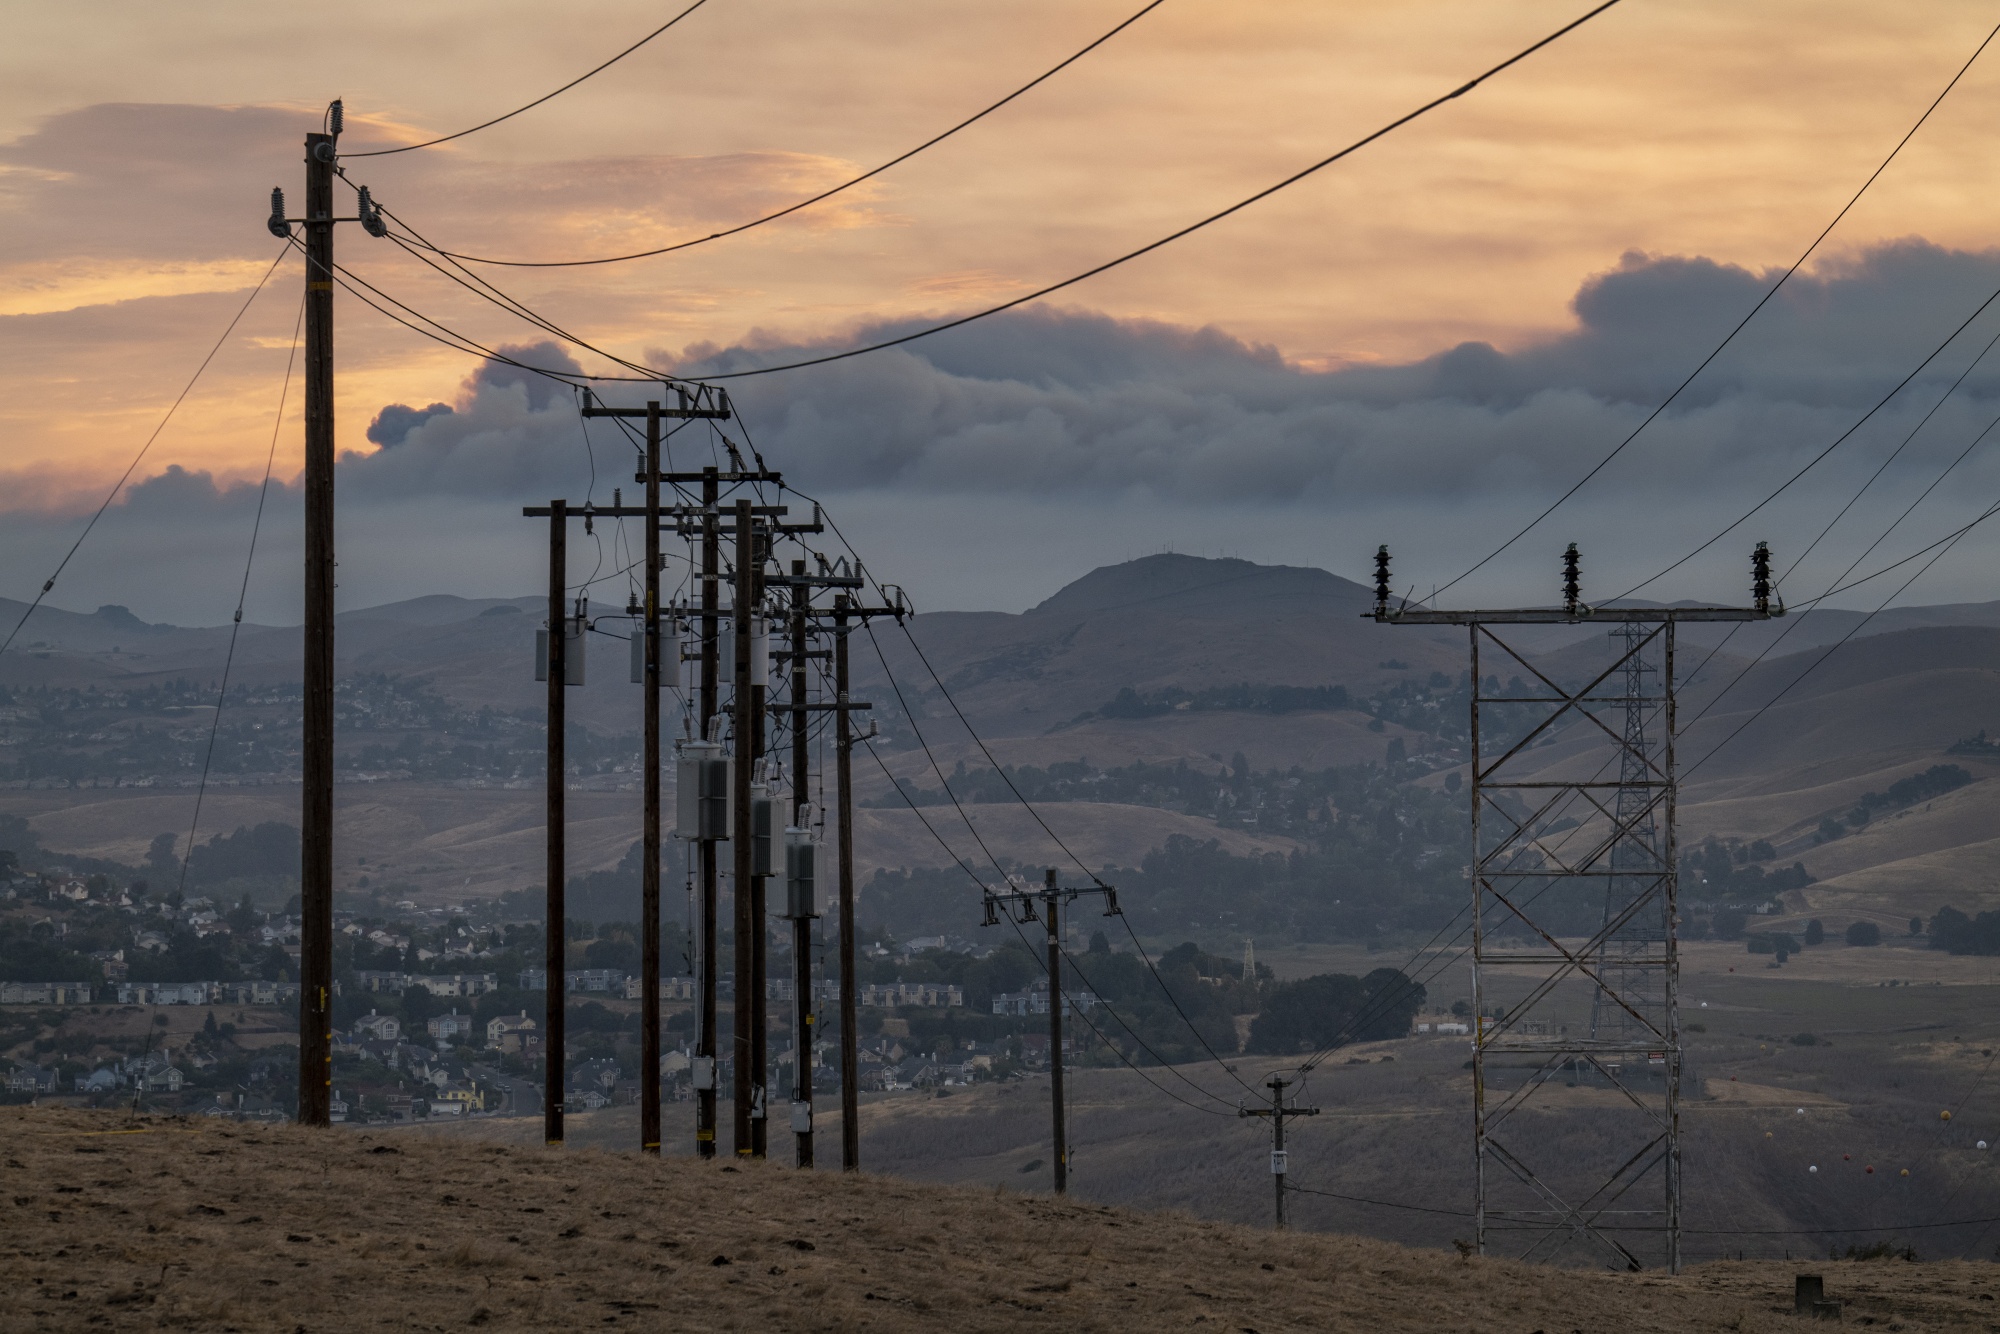 Power lines and transmission towers in Crockett, California.